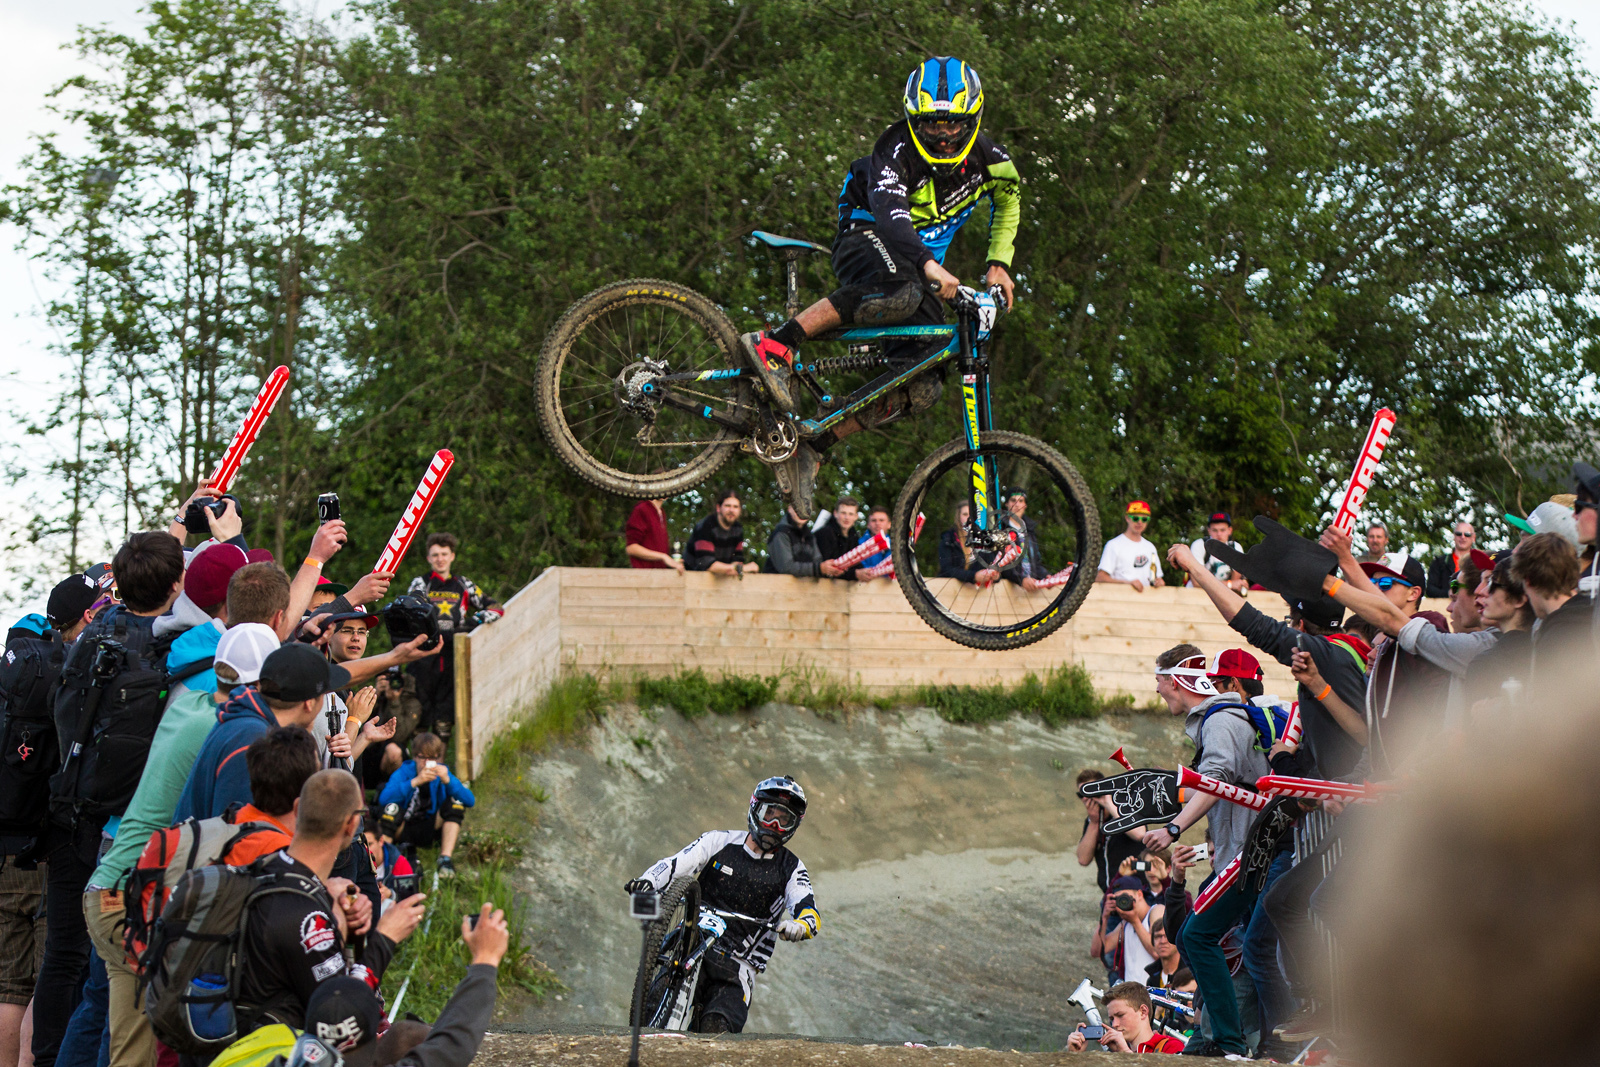 Ed Masters (NZL Bergamont Hayes Team) at Whip Offs at iXS Dirt